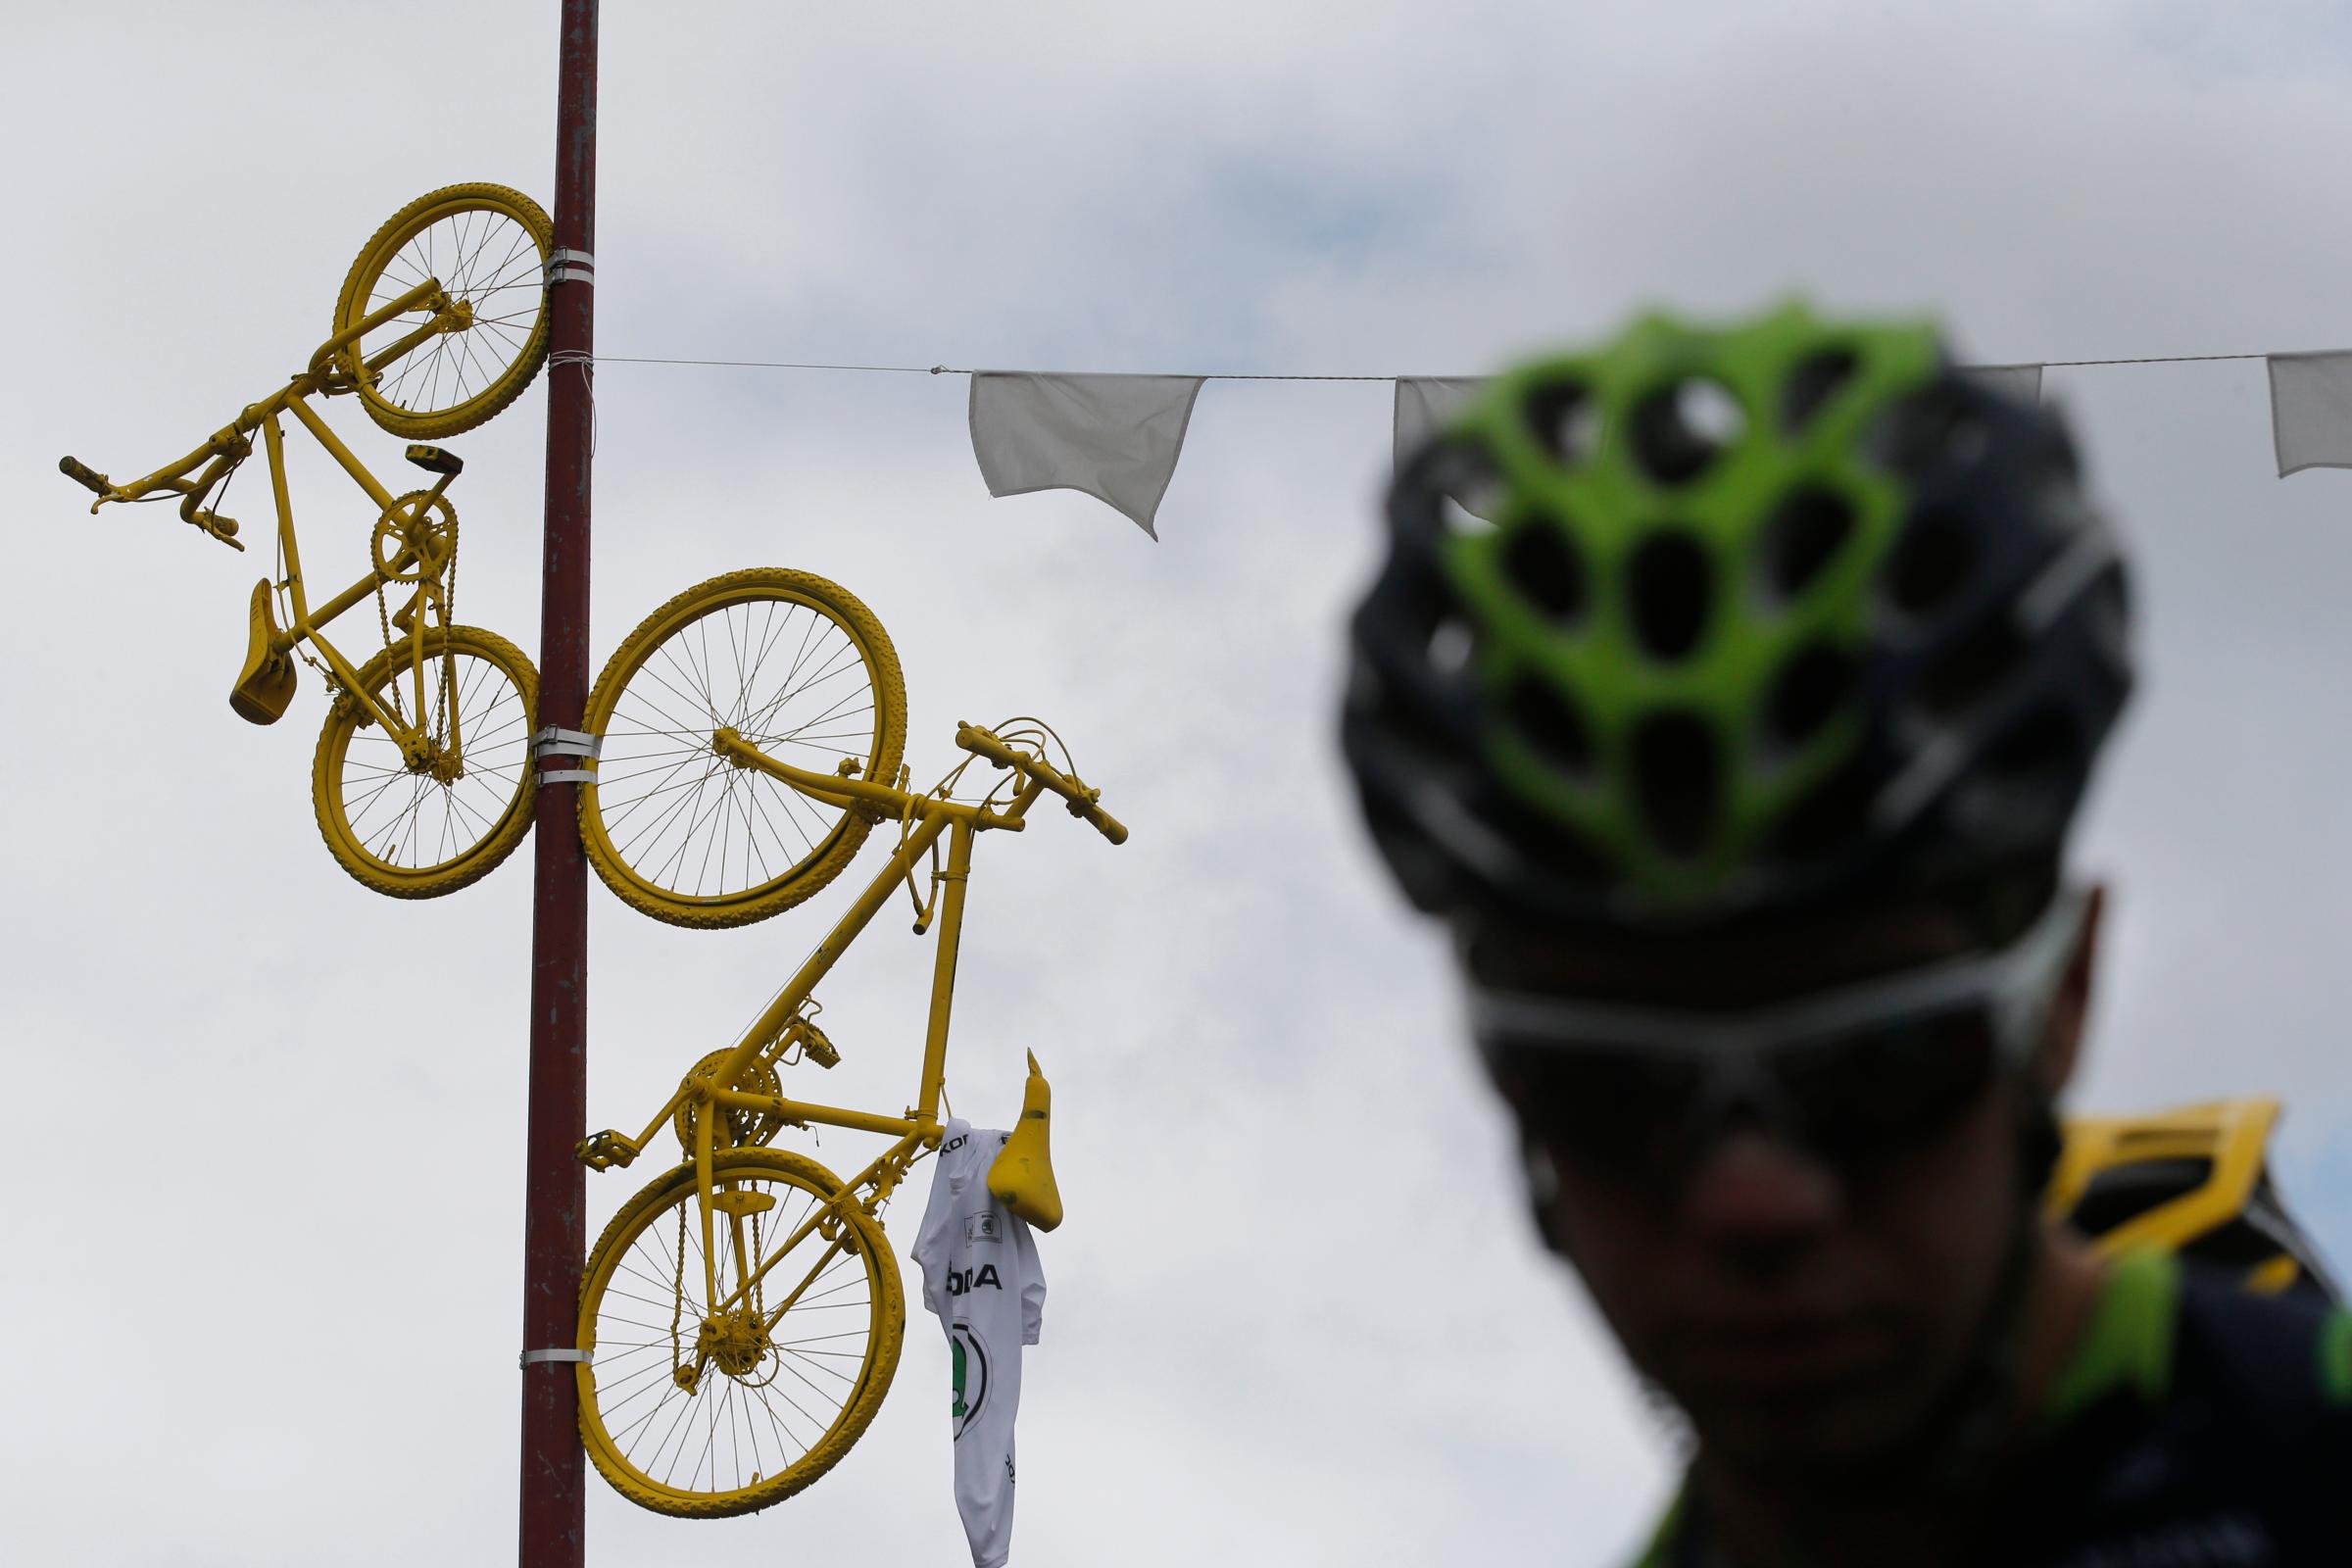 Decorated bicycles hang from a lamppost as riders arrive for the start of the ninth stage of the Tour de France cycling race over 170 kilometers (105.6 miles) with start in Gerardmer and finish in Mulhouse, France on July 13, 2014.